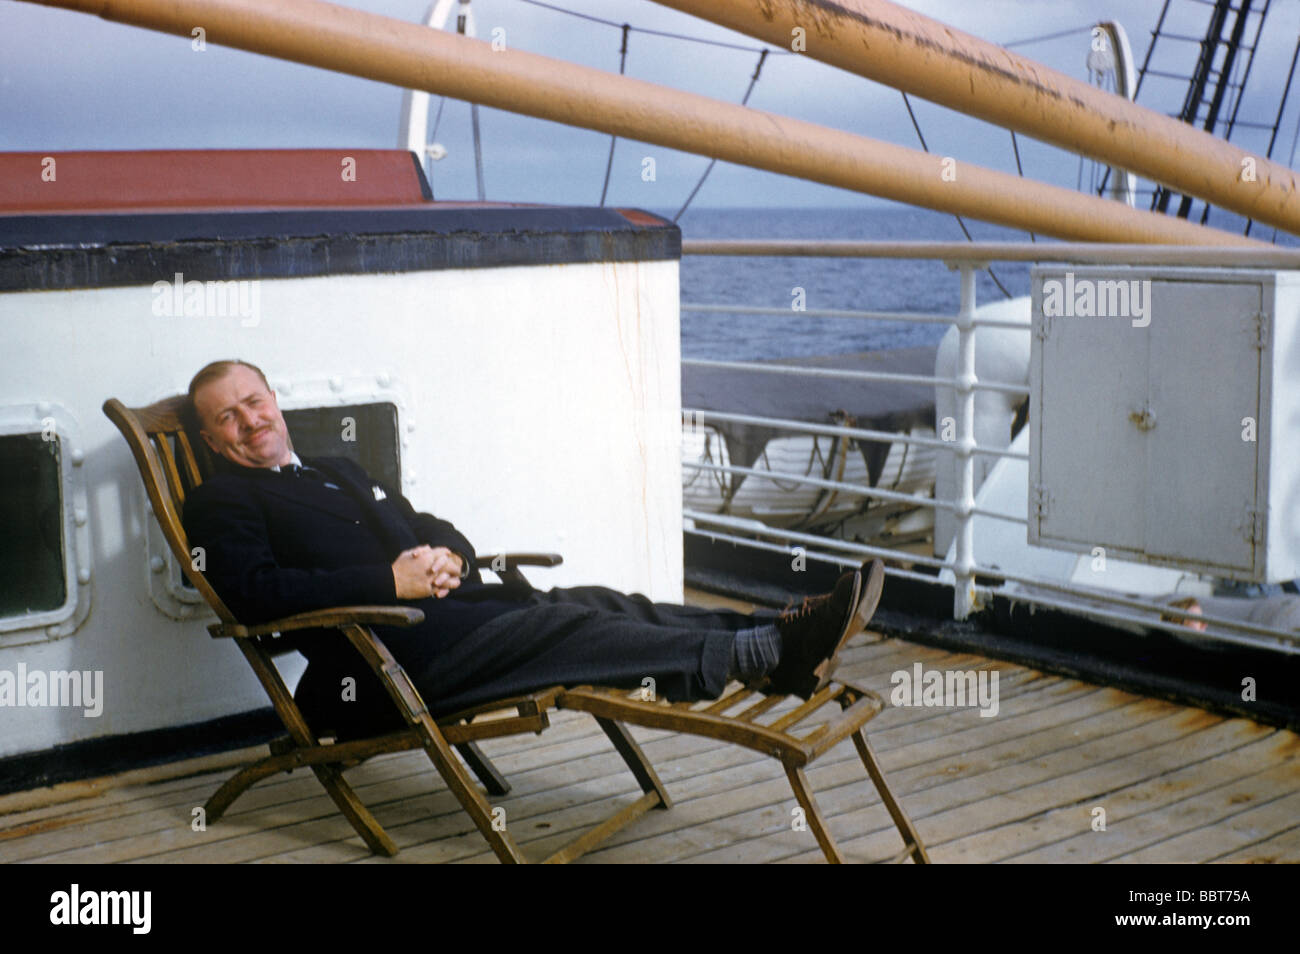 Dressed to travel in style, a dapper business man reclines in a steamer chair at the start of voyage to new life across the pond Stock Photo